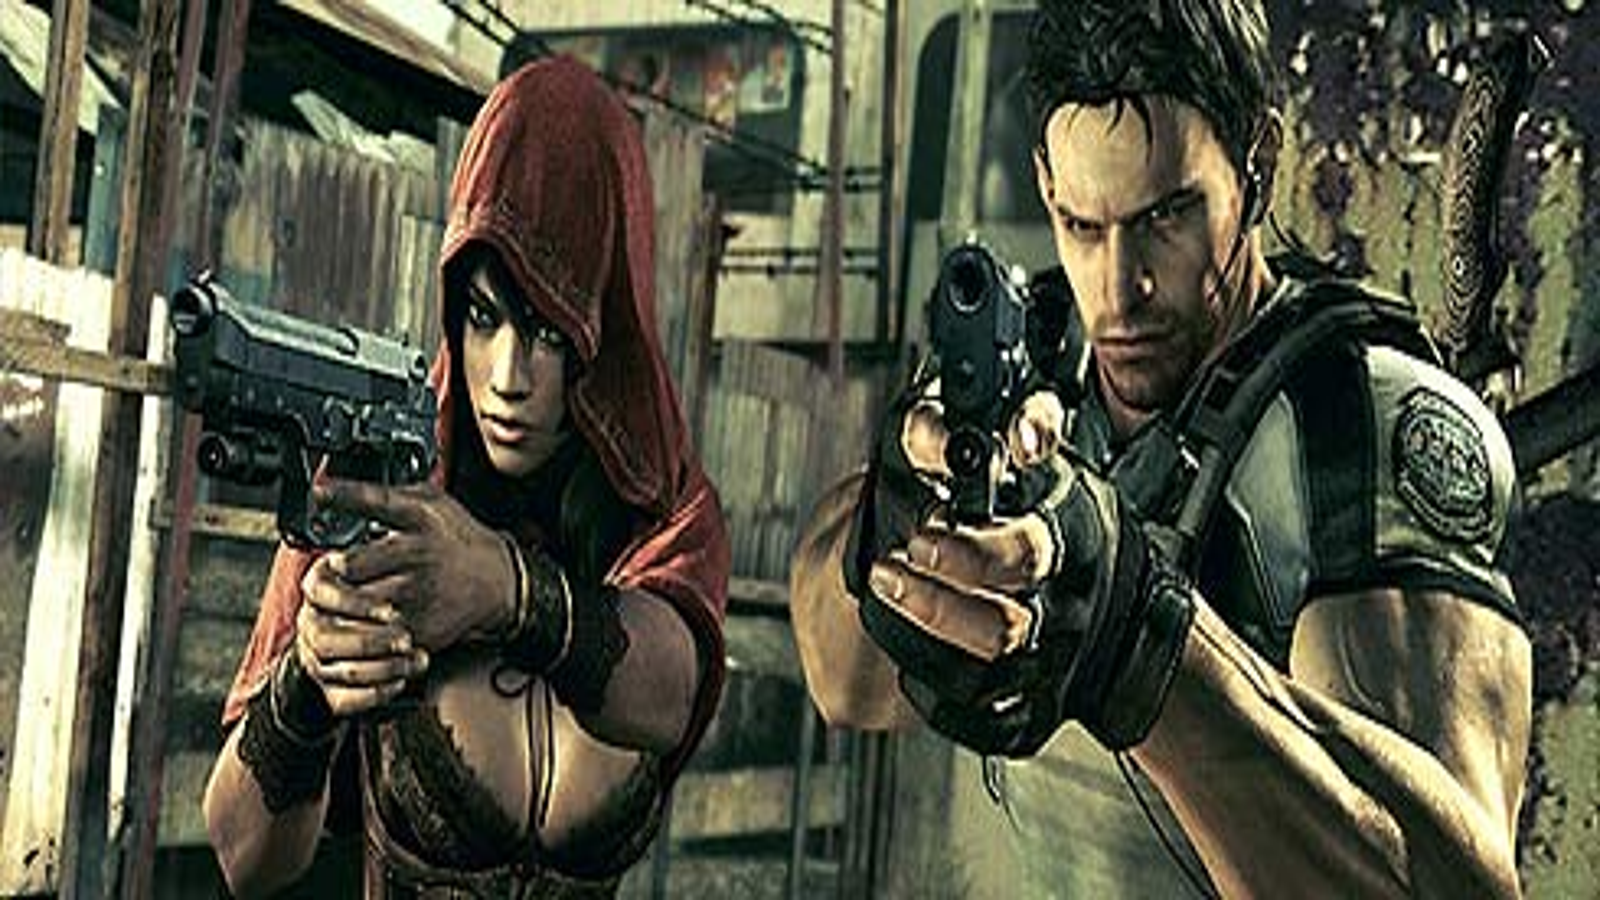 Resident evil 5 - Modification of the character and more